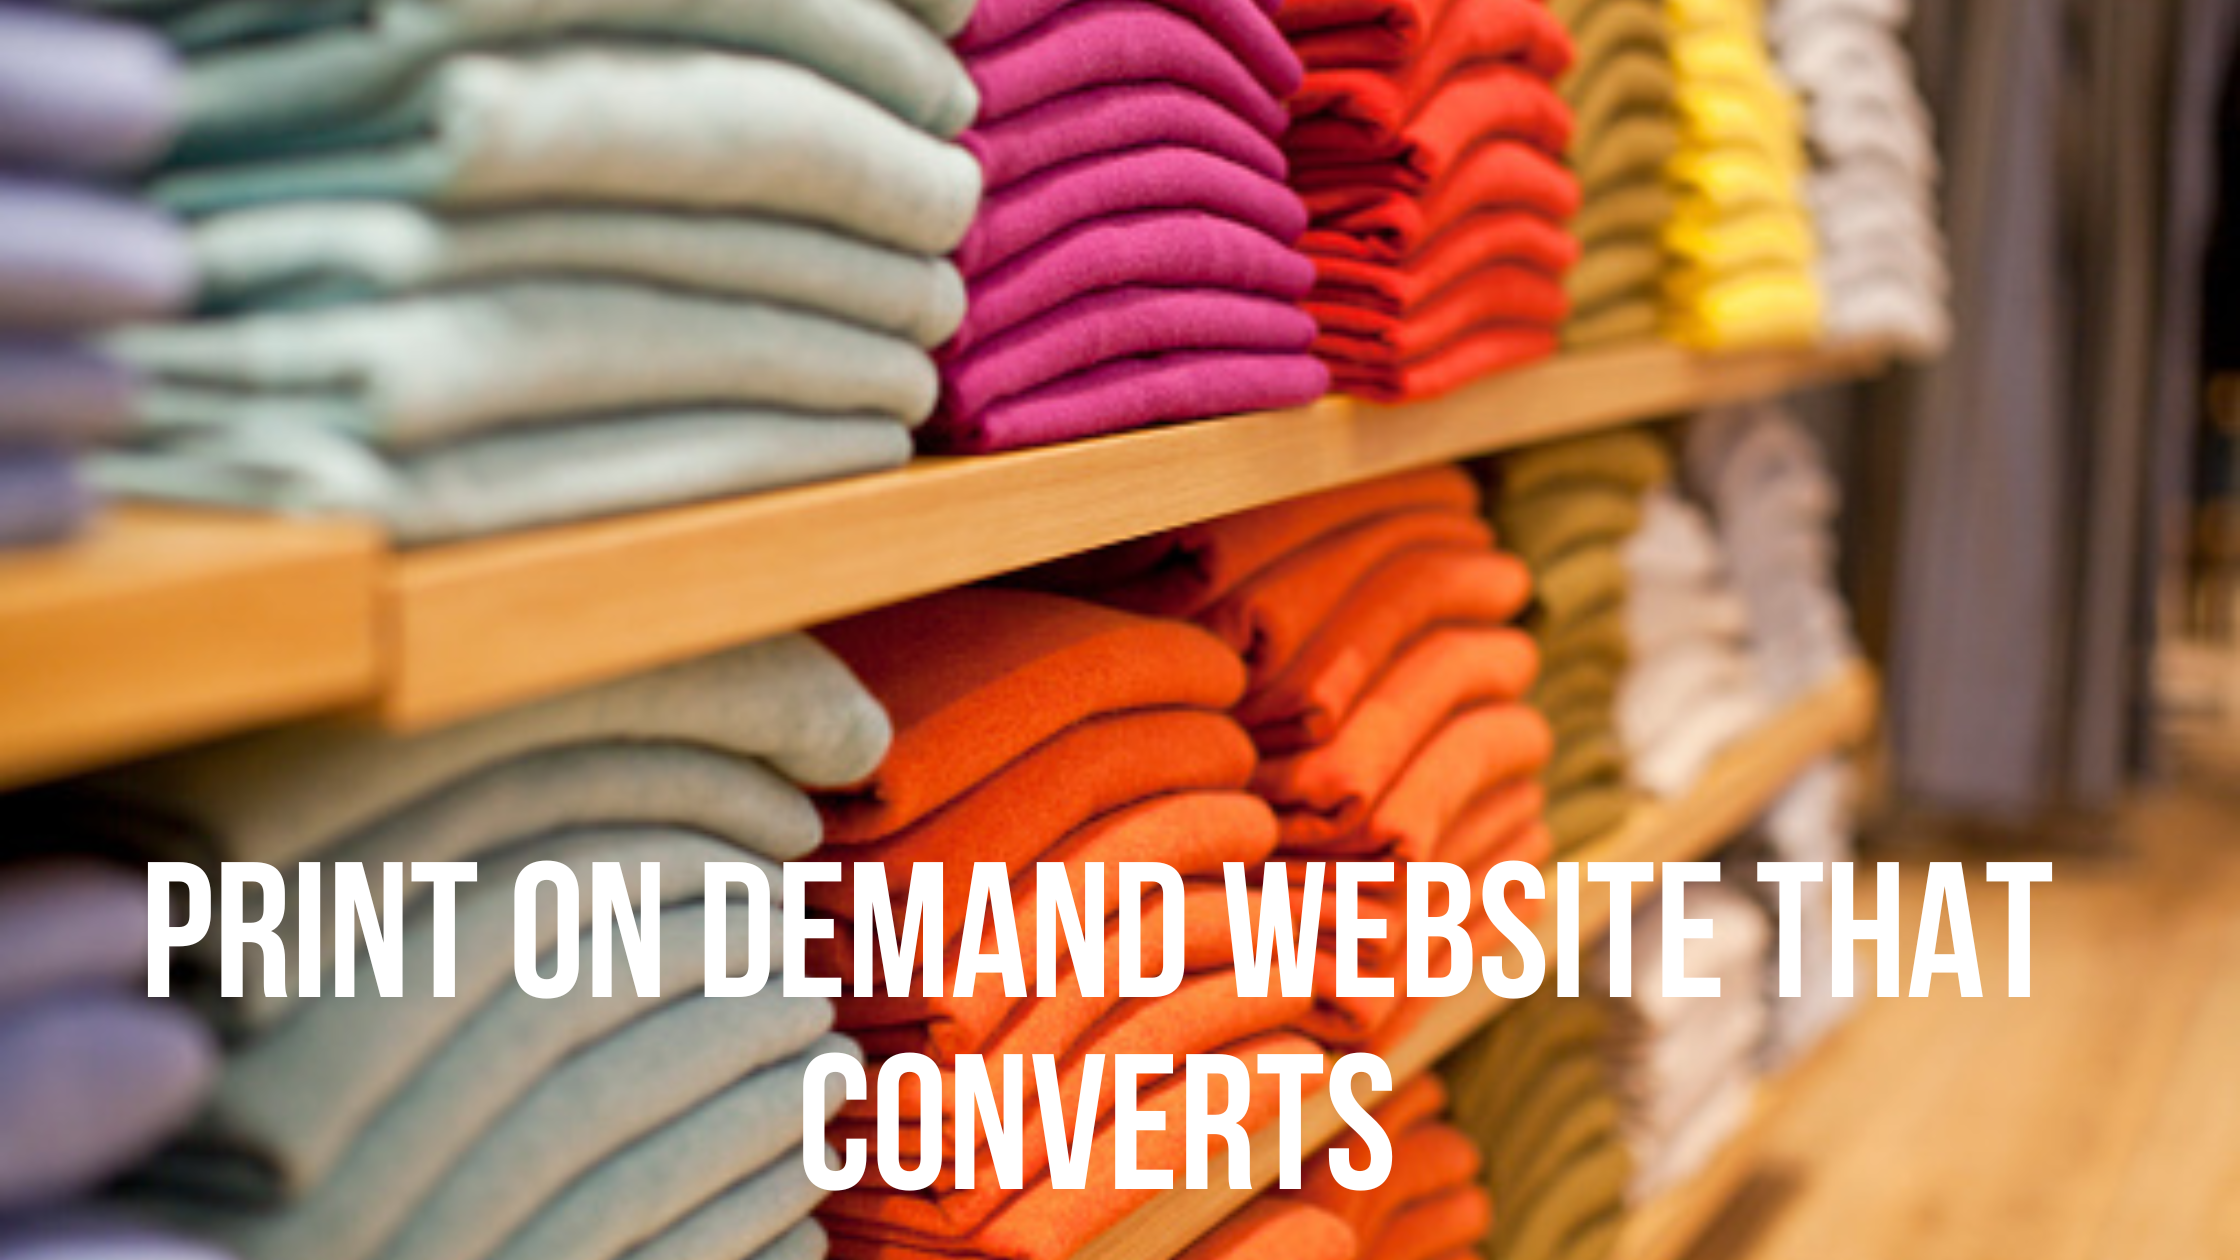 How to Create a Print on Demand Website That Converts